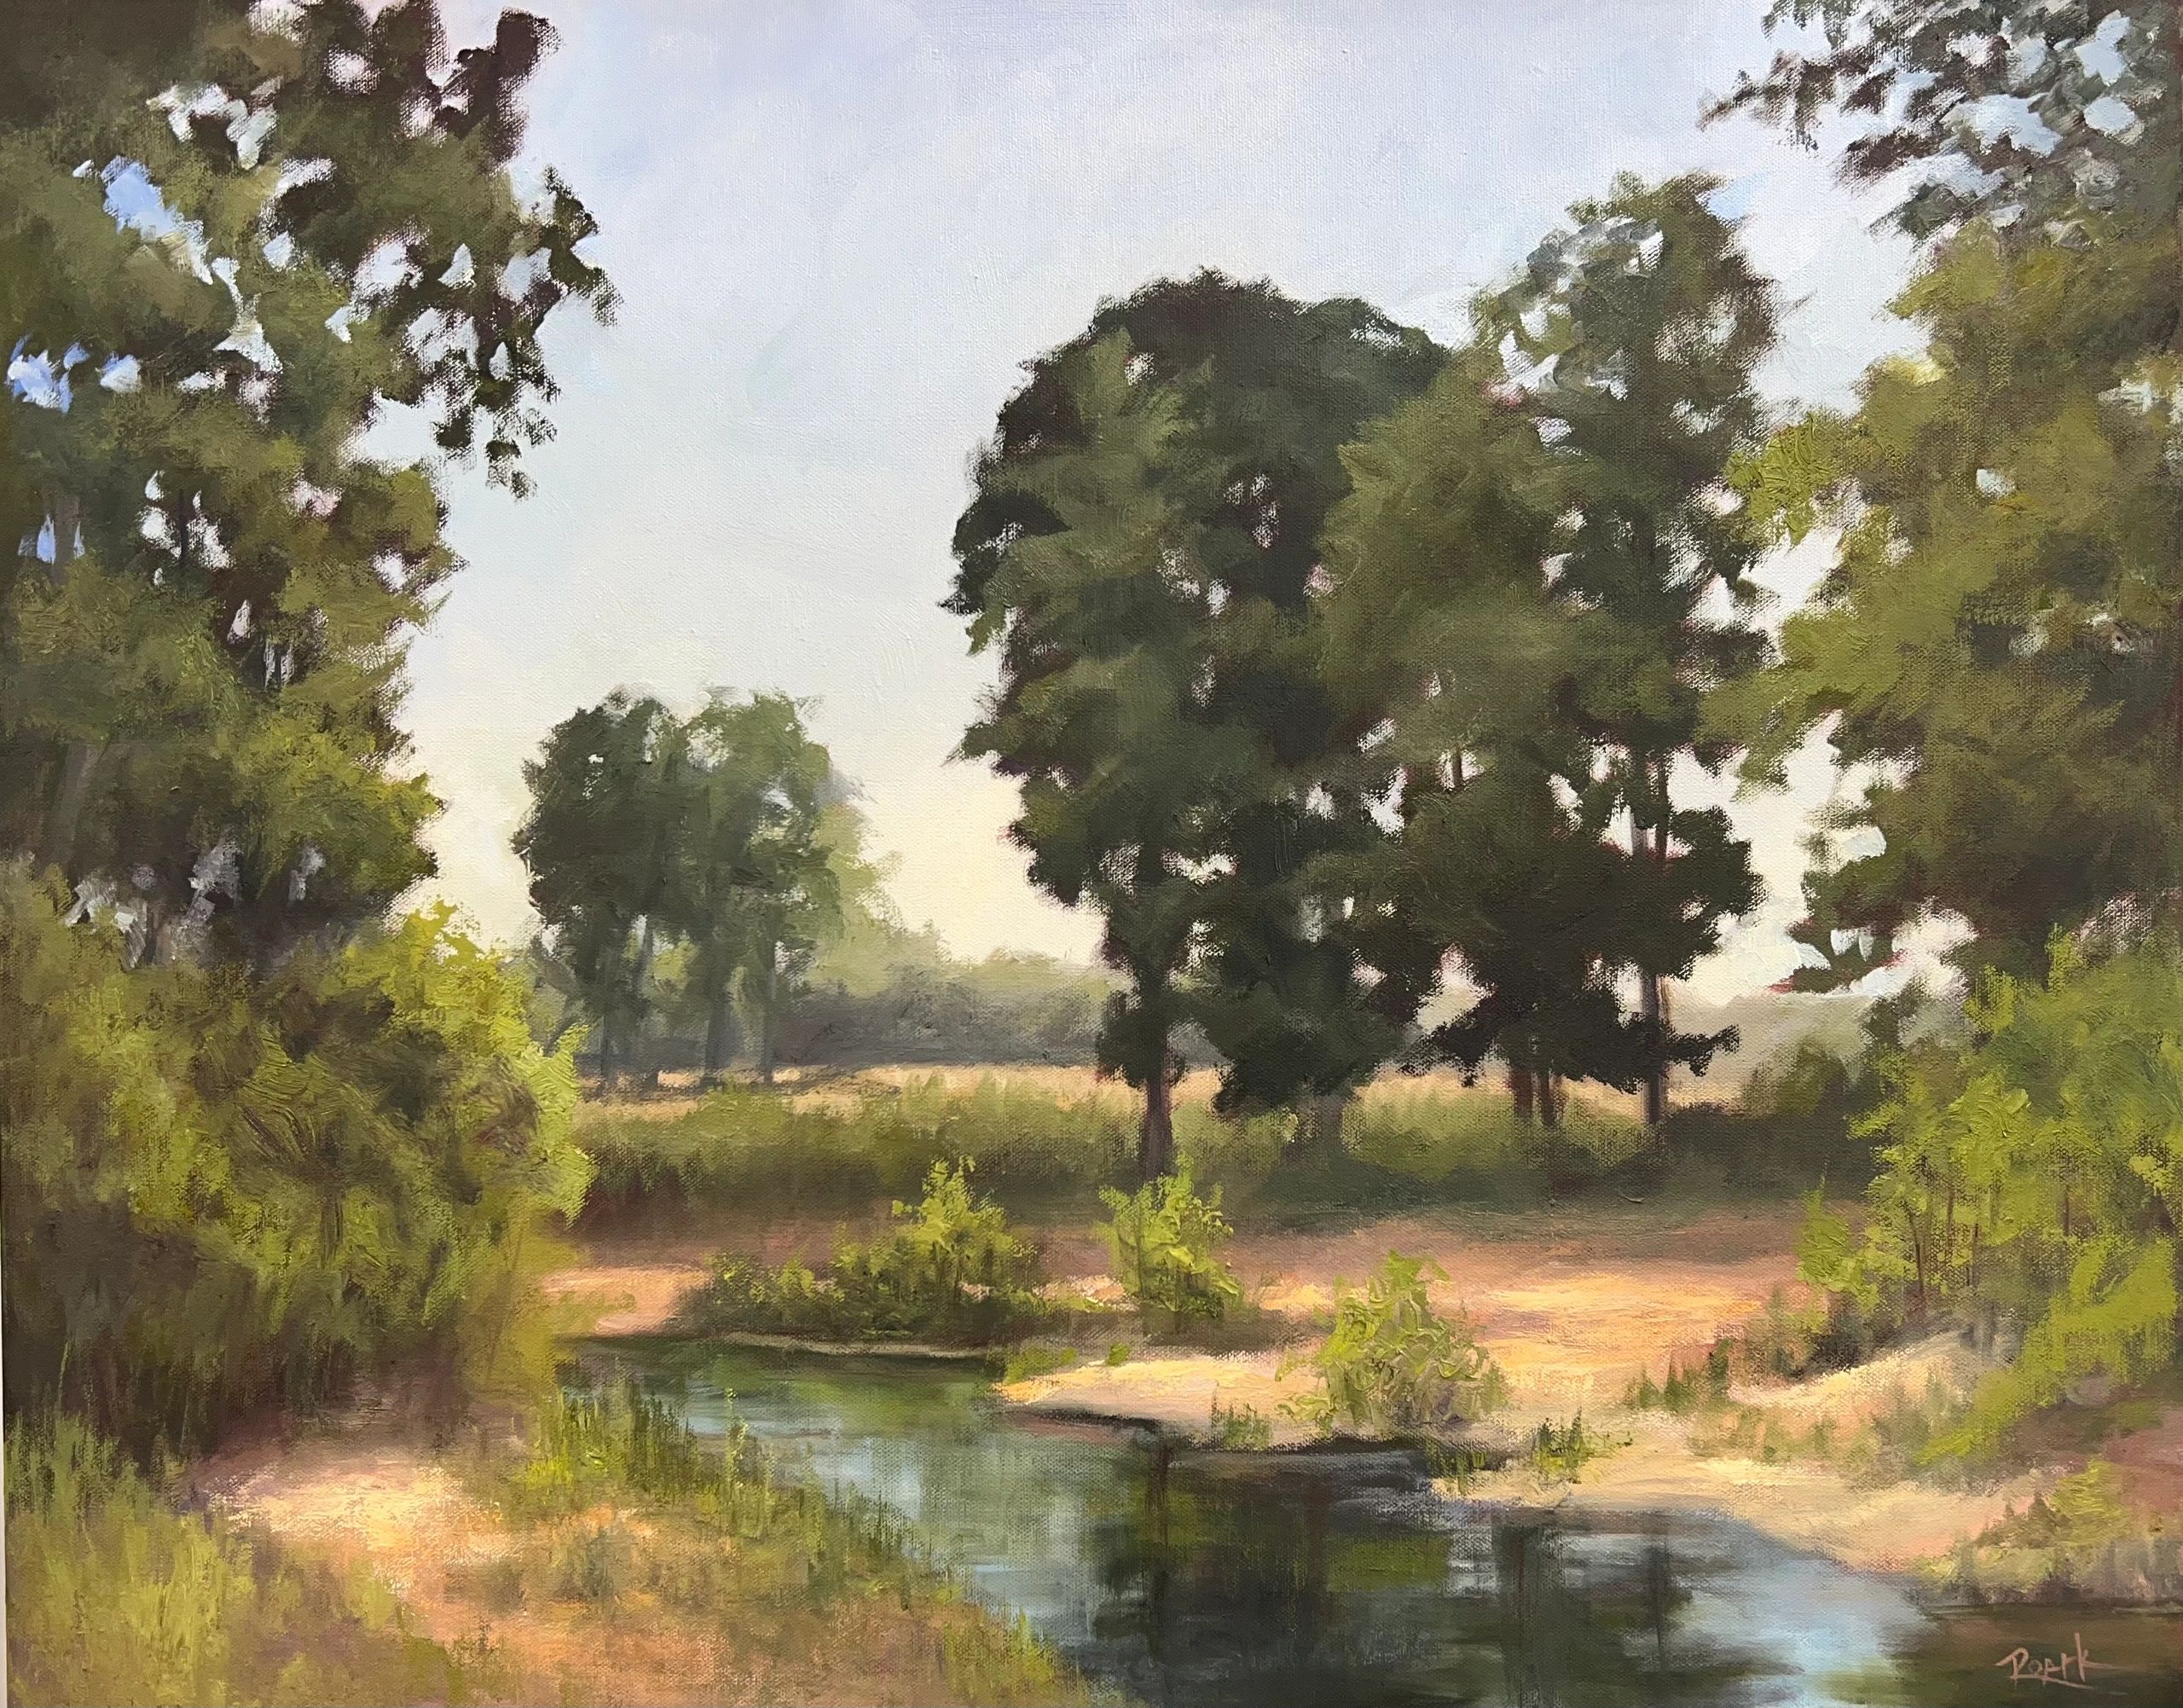 The lush Mississippi landscape glows in this original oil by Carol Roark